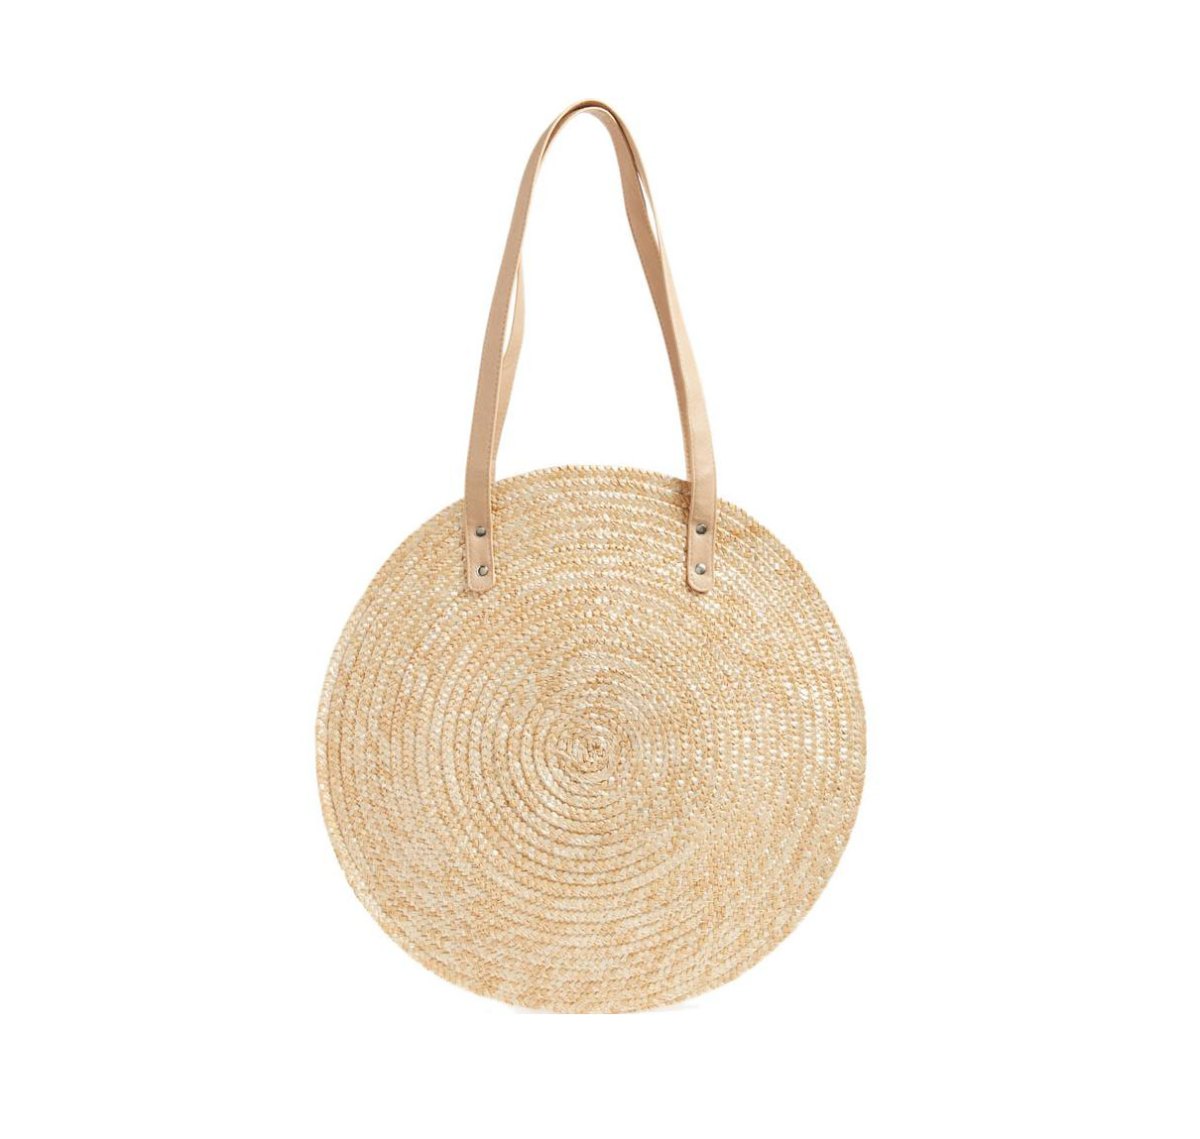 Spring 2018 Trend: Woven, Wicker and Straw, Shoes, Bags and Hats